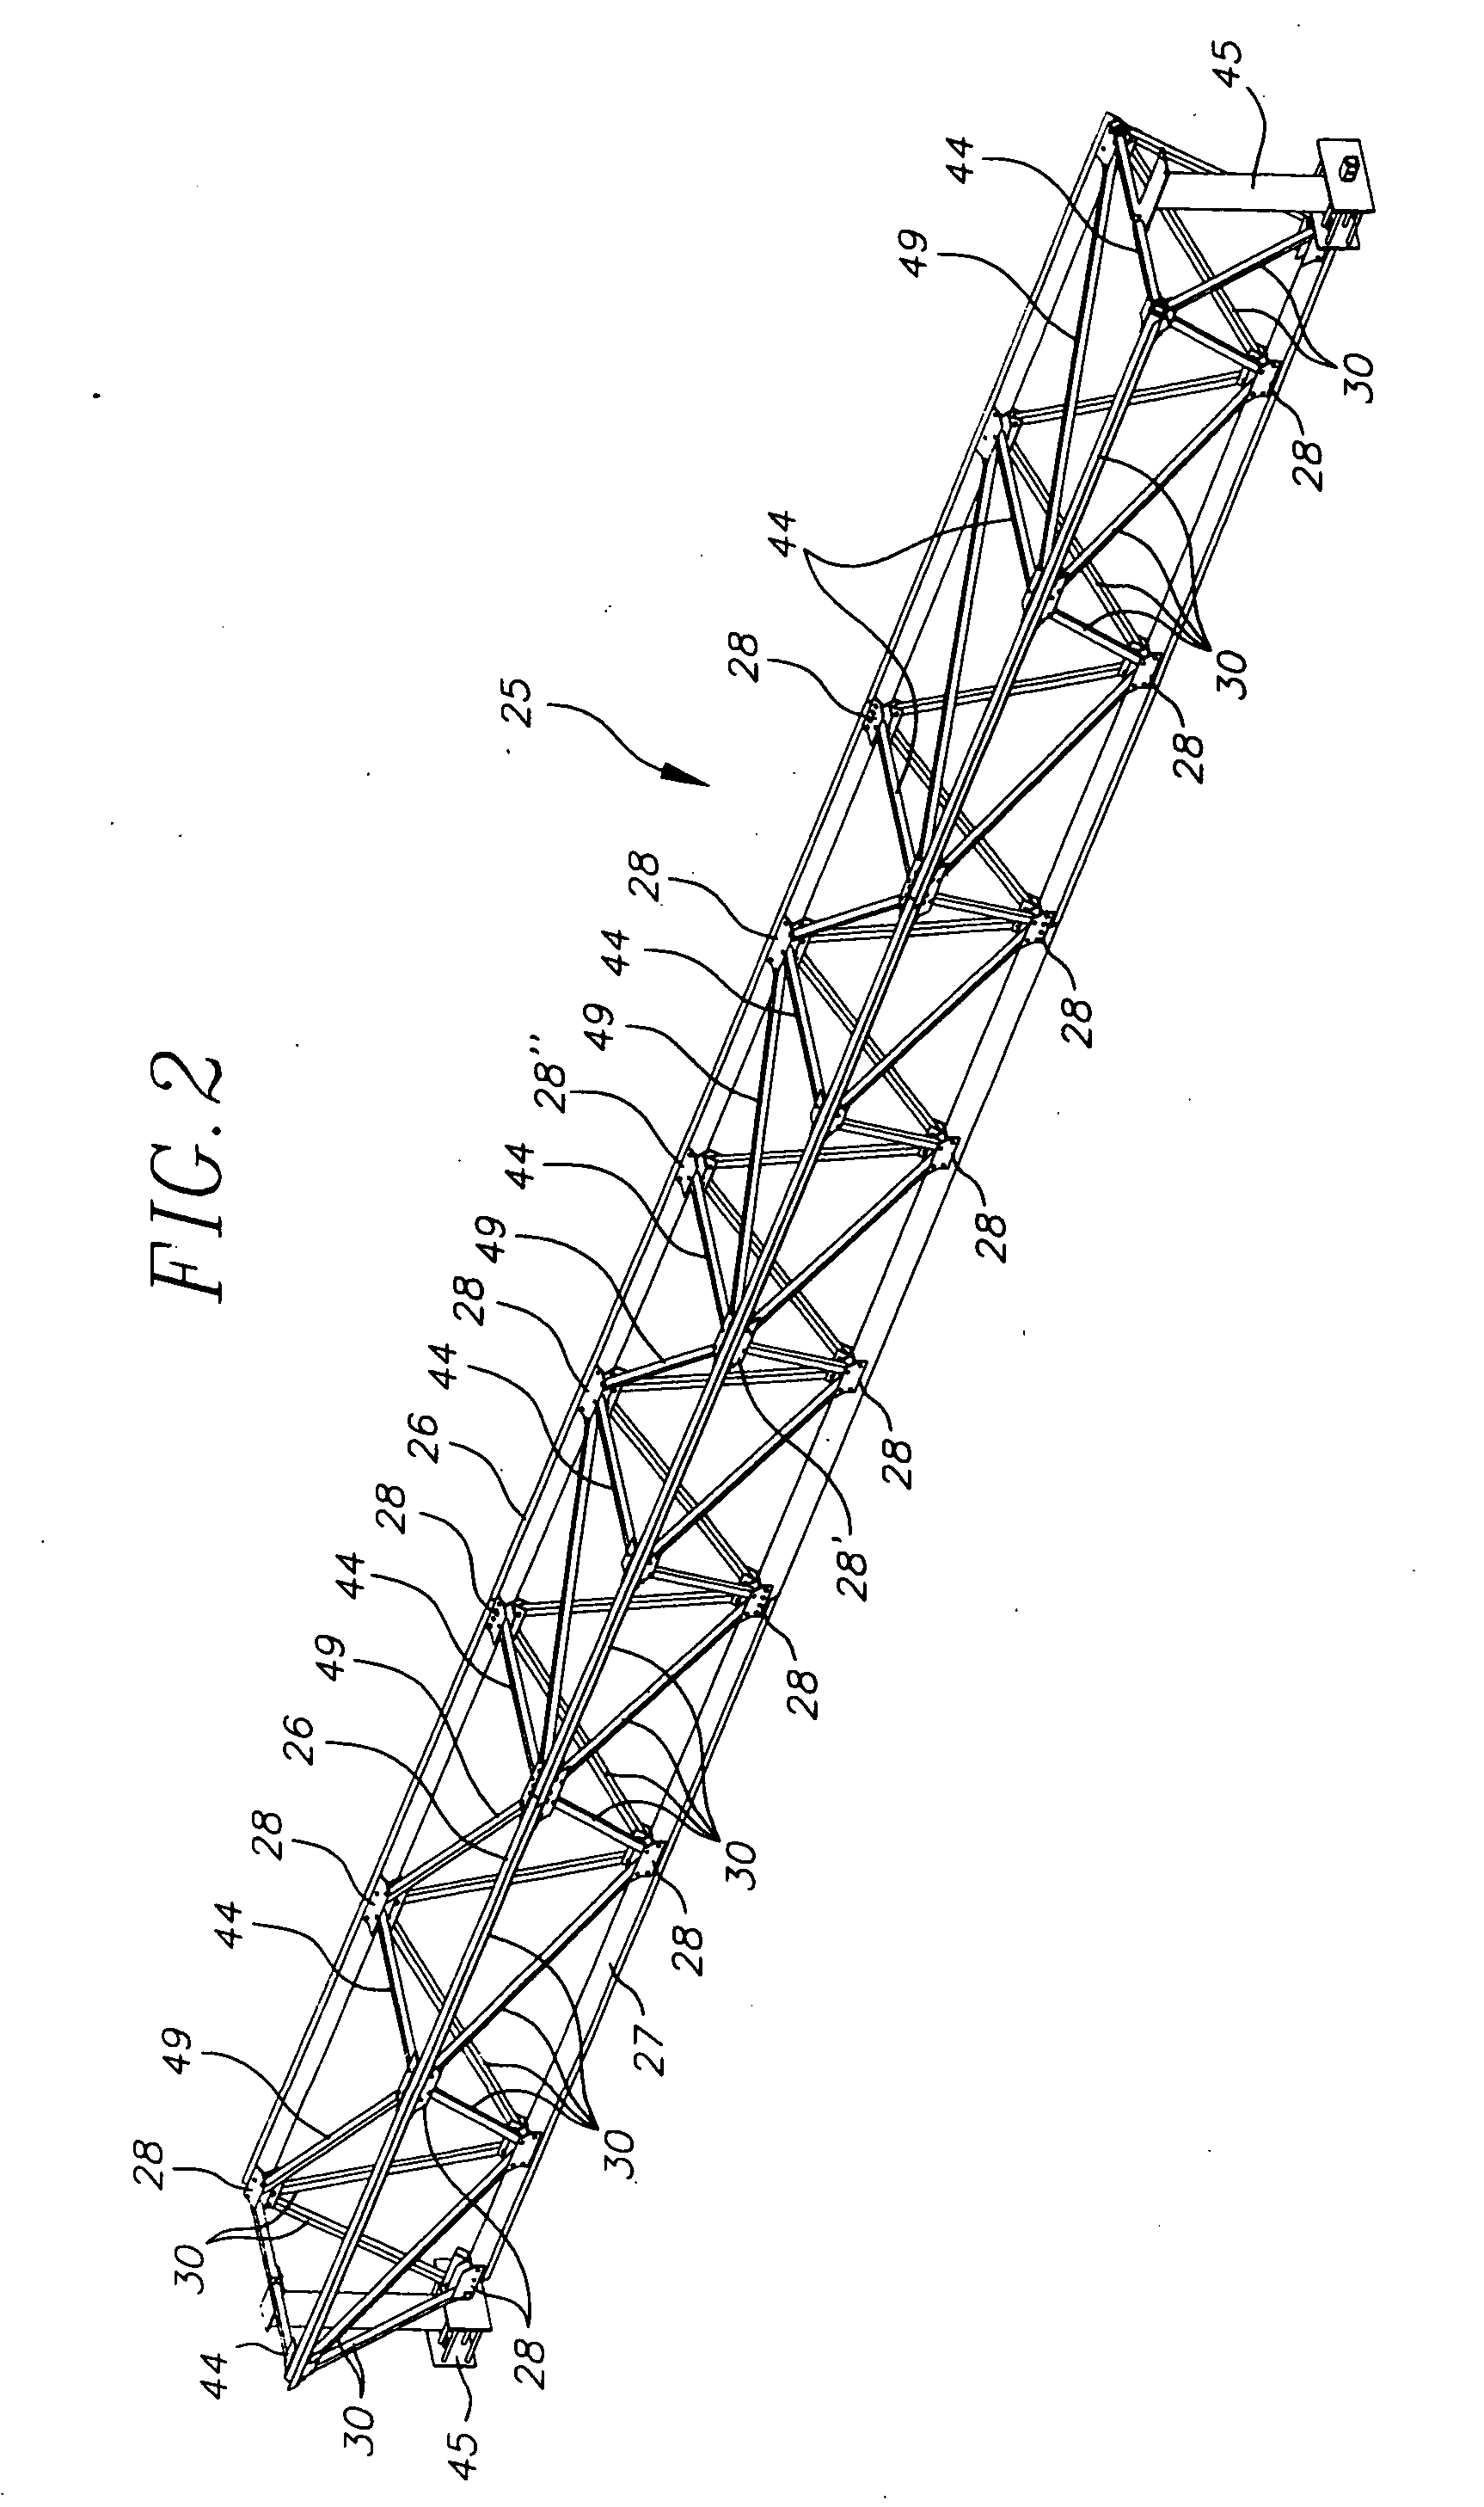 Tubular structural member with non-uniform wall thickness